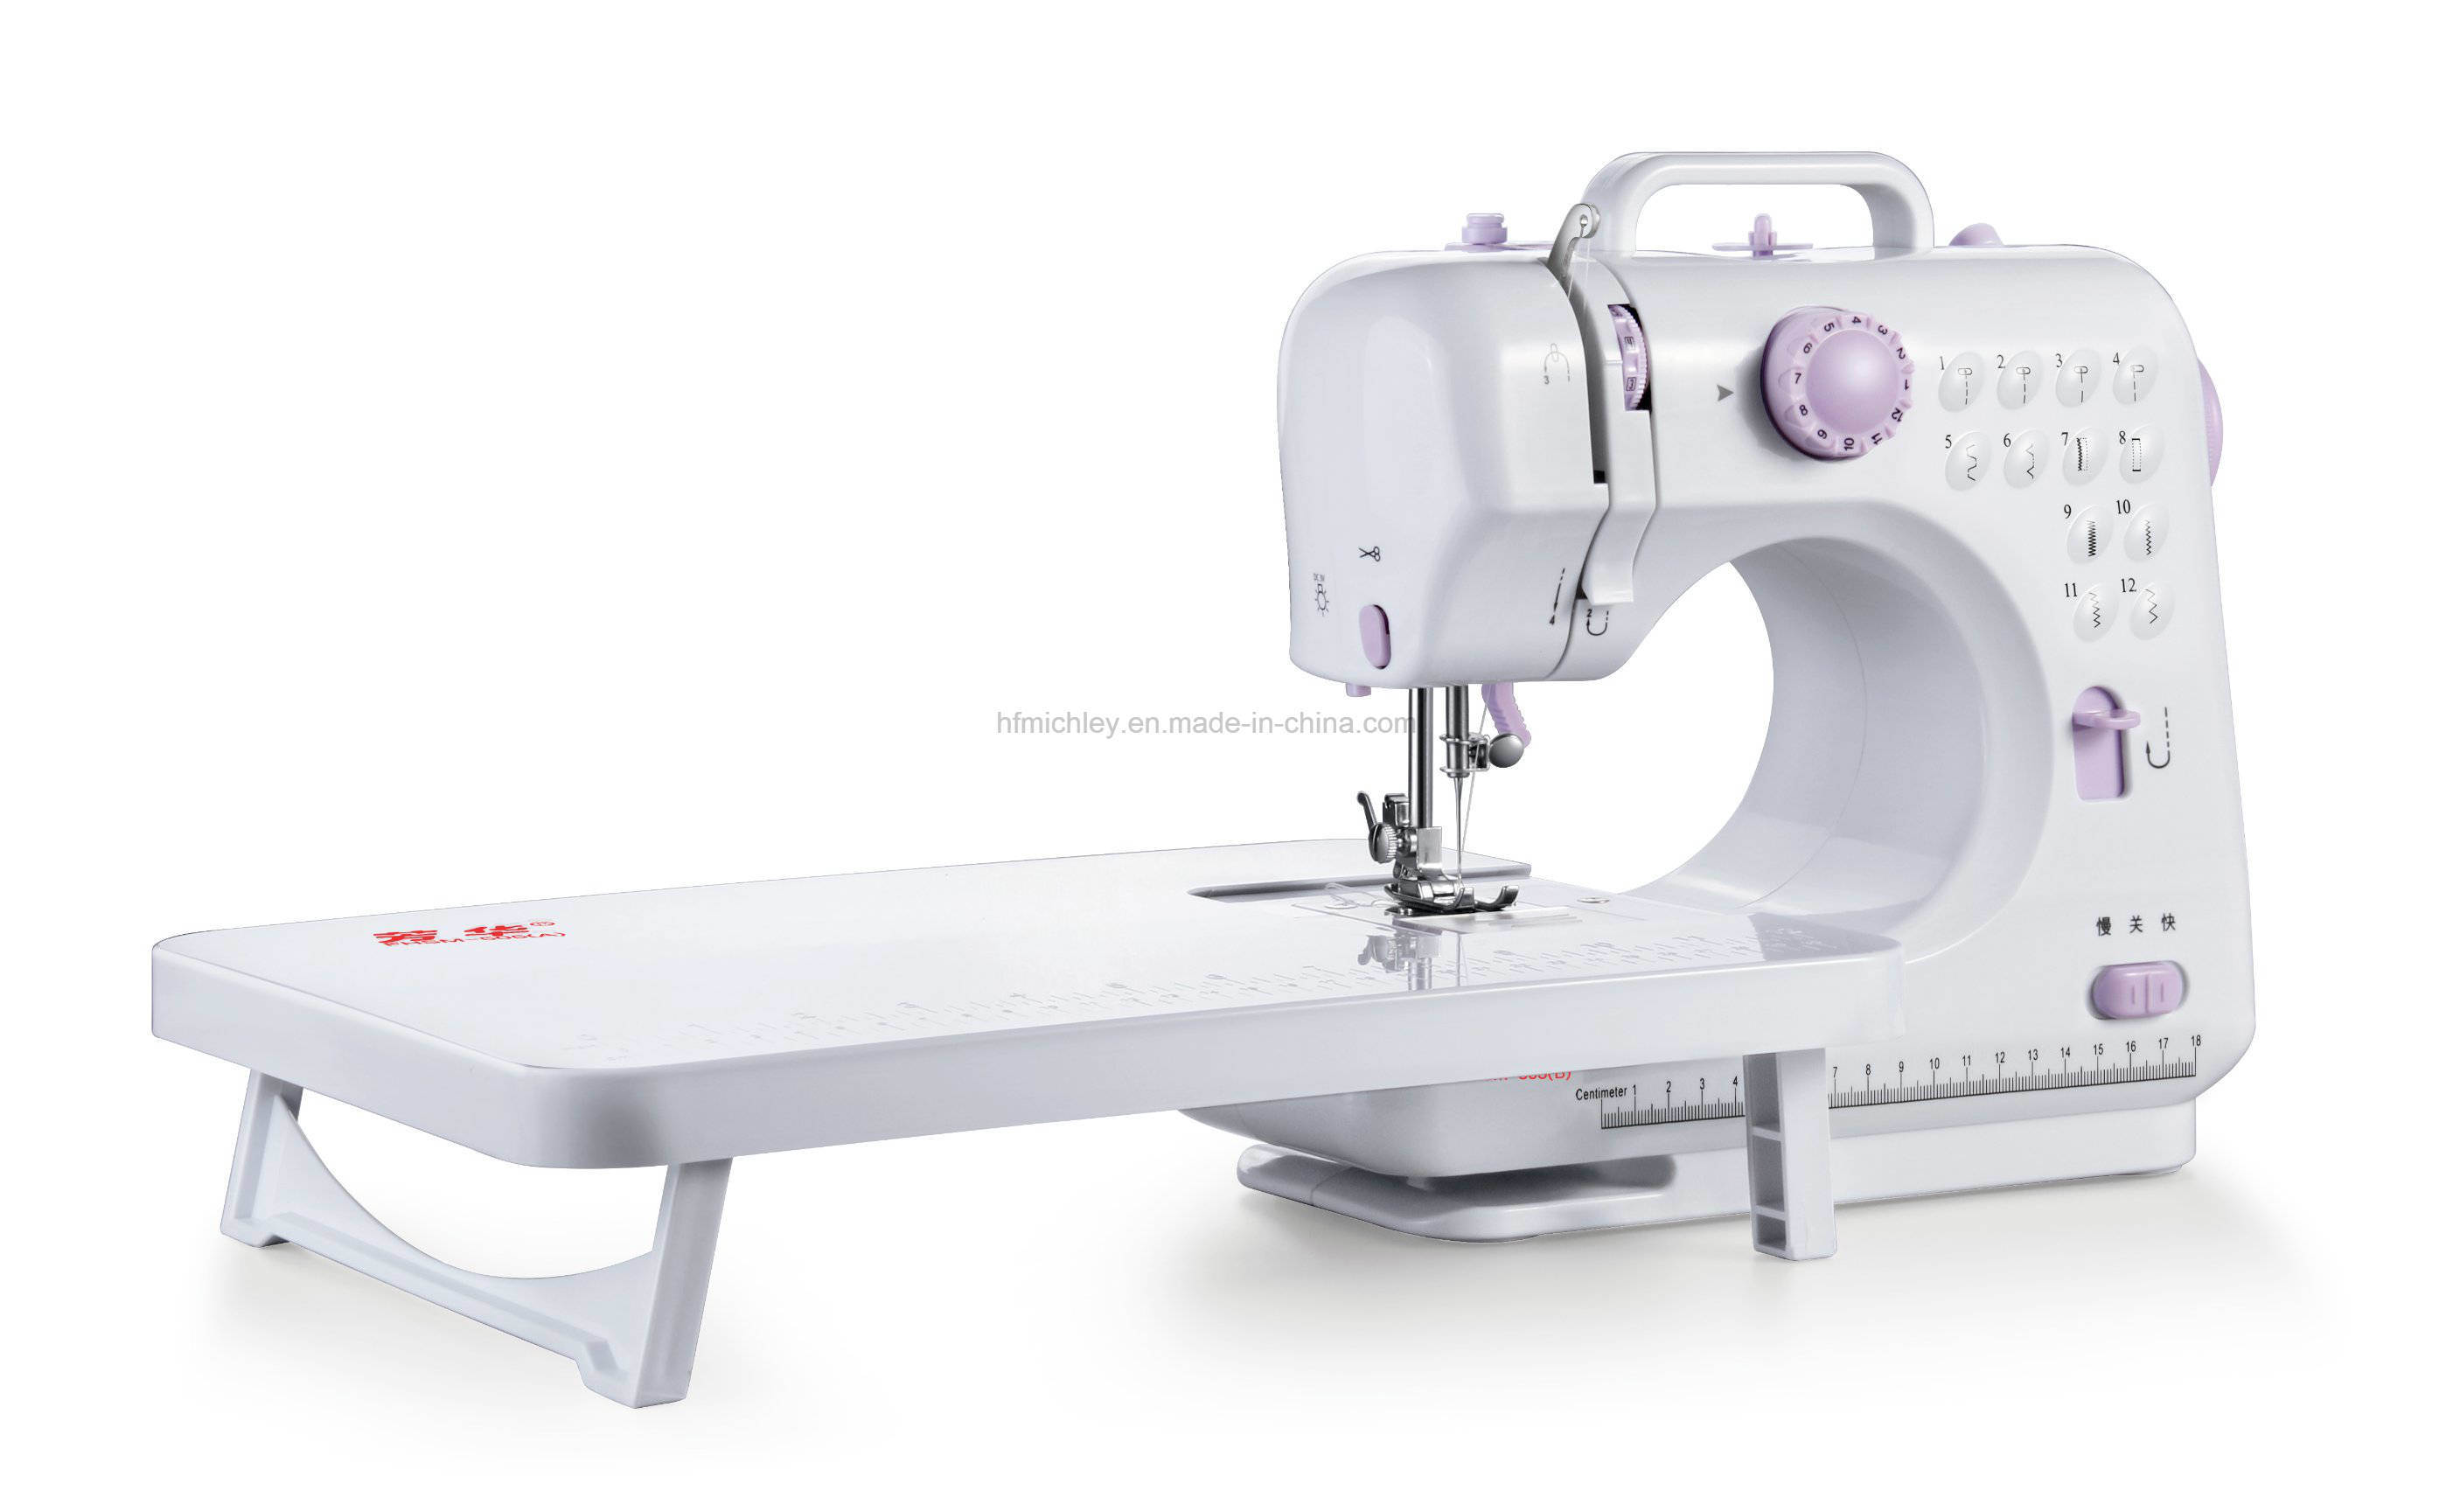 Factory Wholesale Price Electrical Stitching Domestic Sewing Machine Fhsm-505 for Home Use